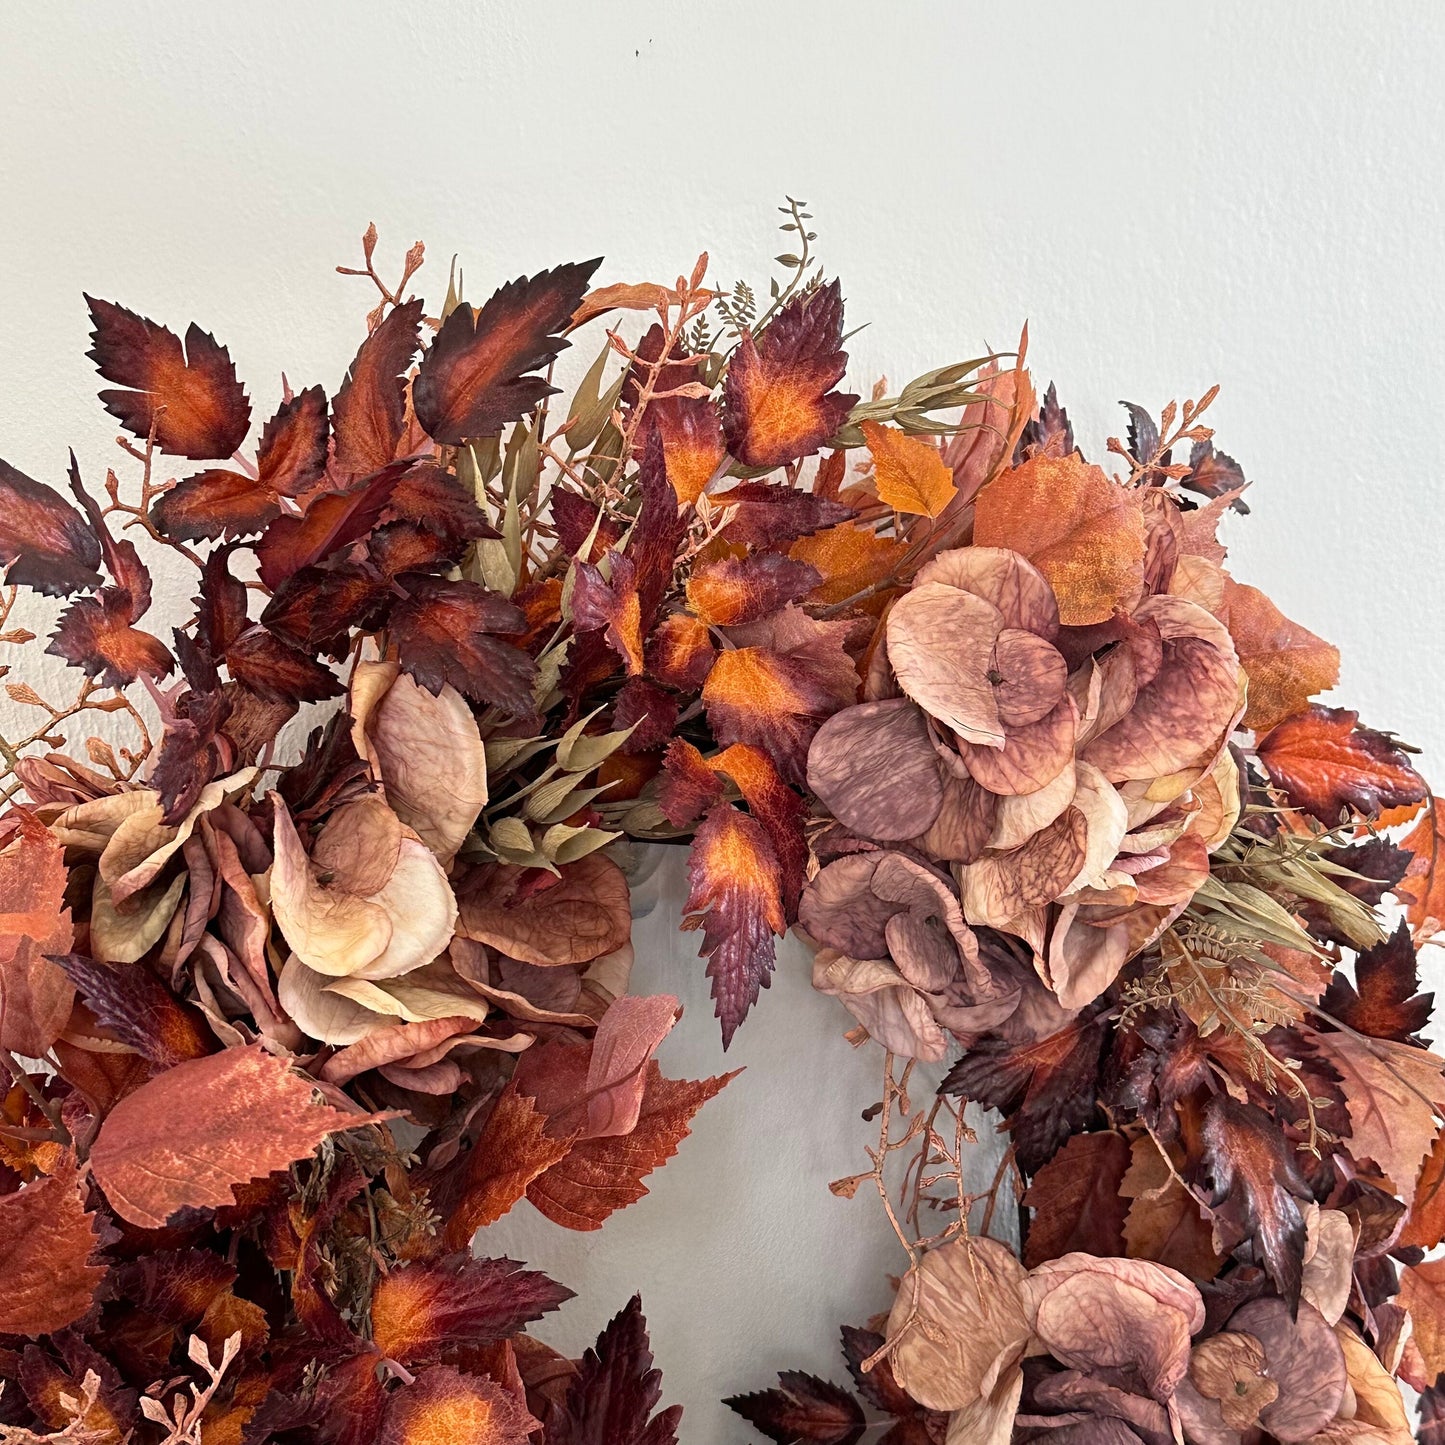 Fall Hydrangea and Eucalyptus Wreath | Terracotta and Rust Colored Faux Floral Wreath for Front Door | Elegant Autumn Wreath | READY TO SHIP